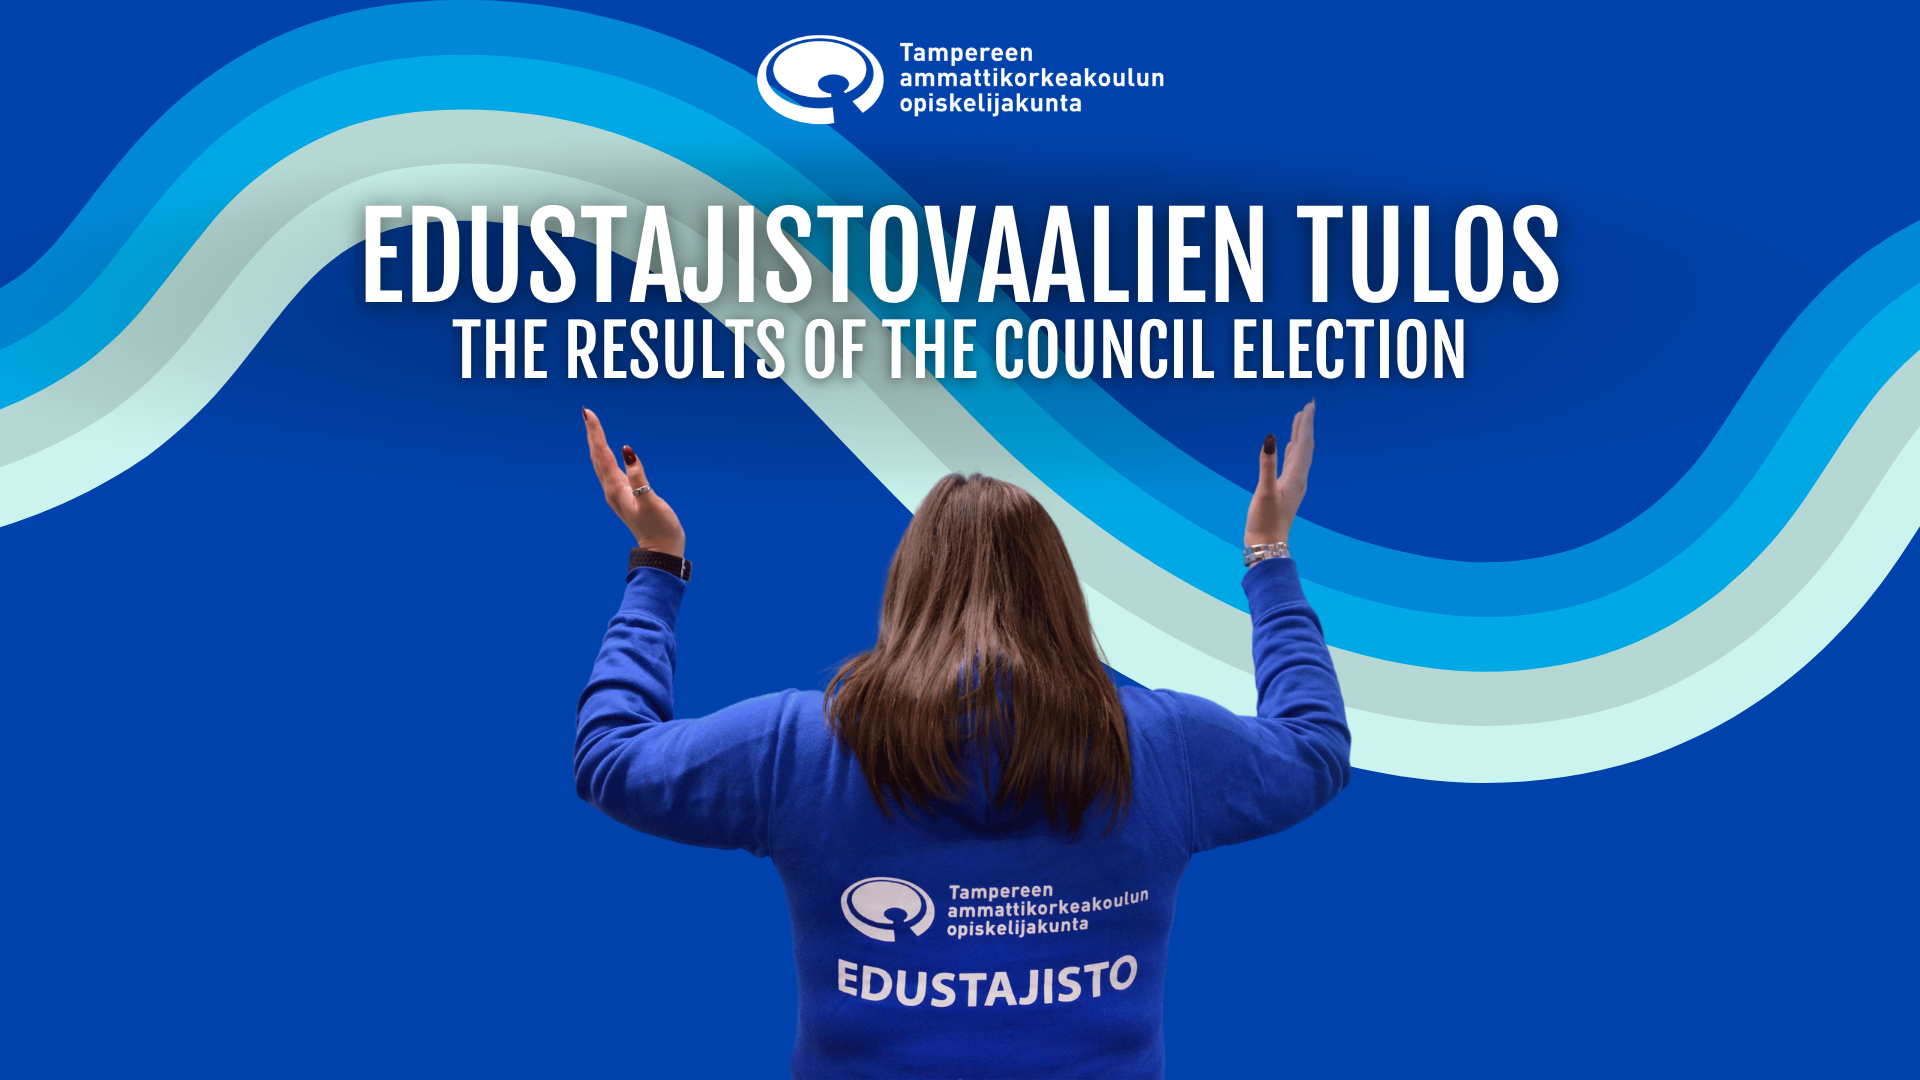 TAMKO’S COUNCIL ELECTIONS RESULTS